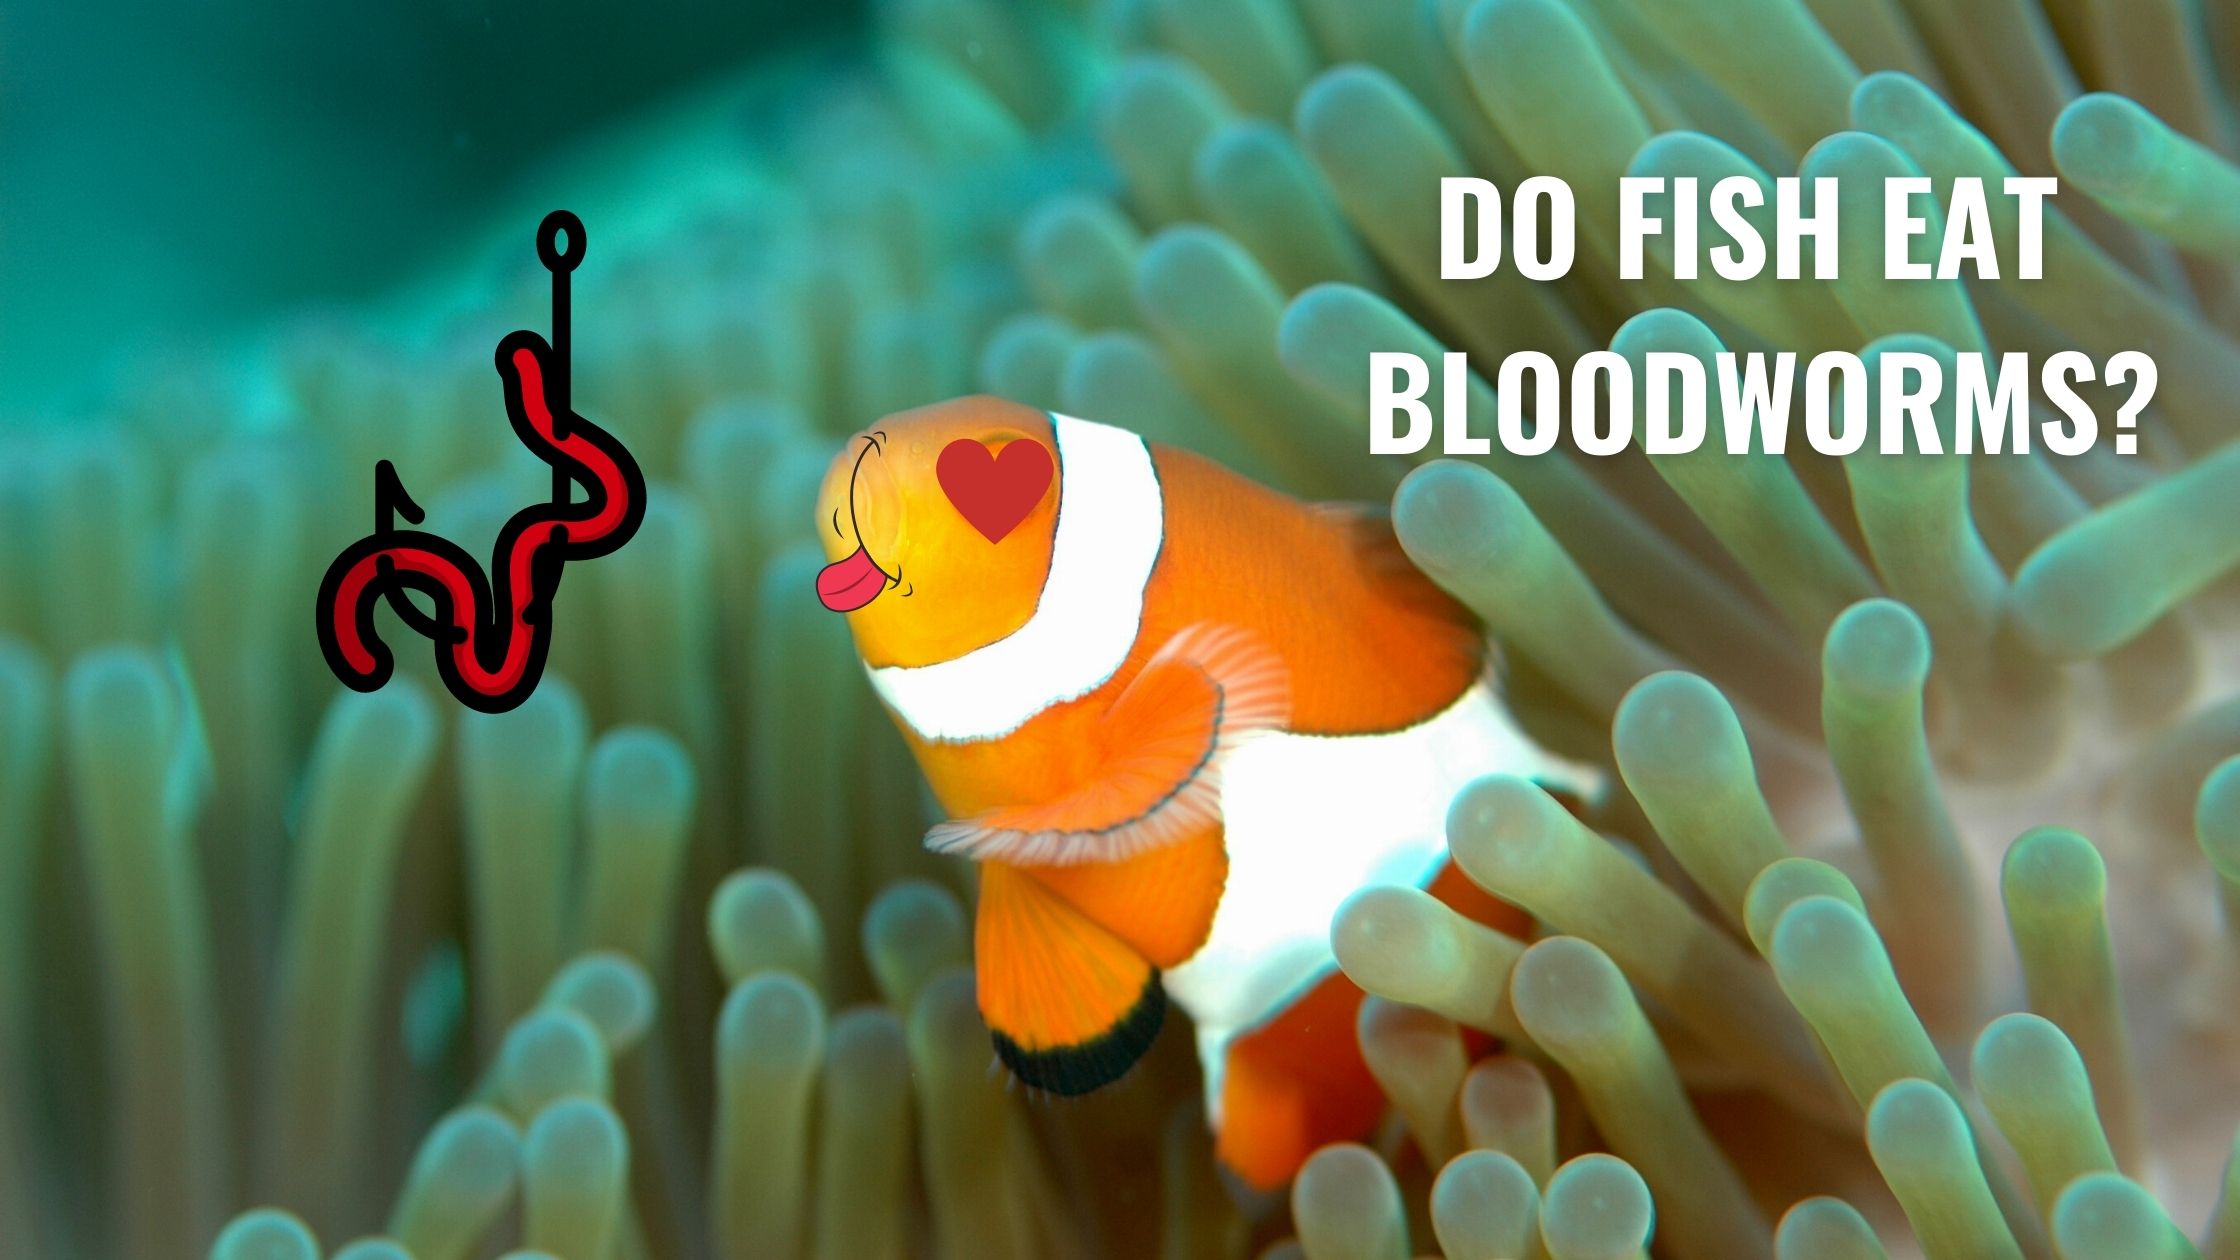 DO FISH EAT BLOODWORMS